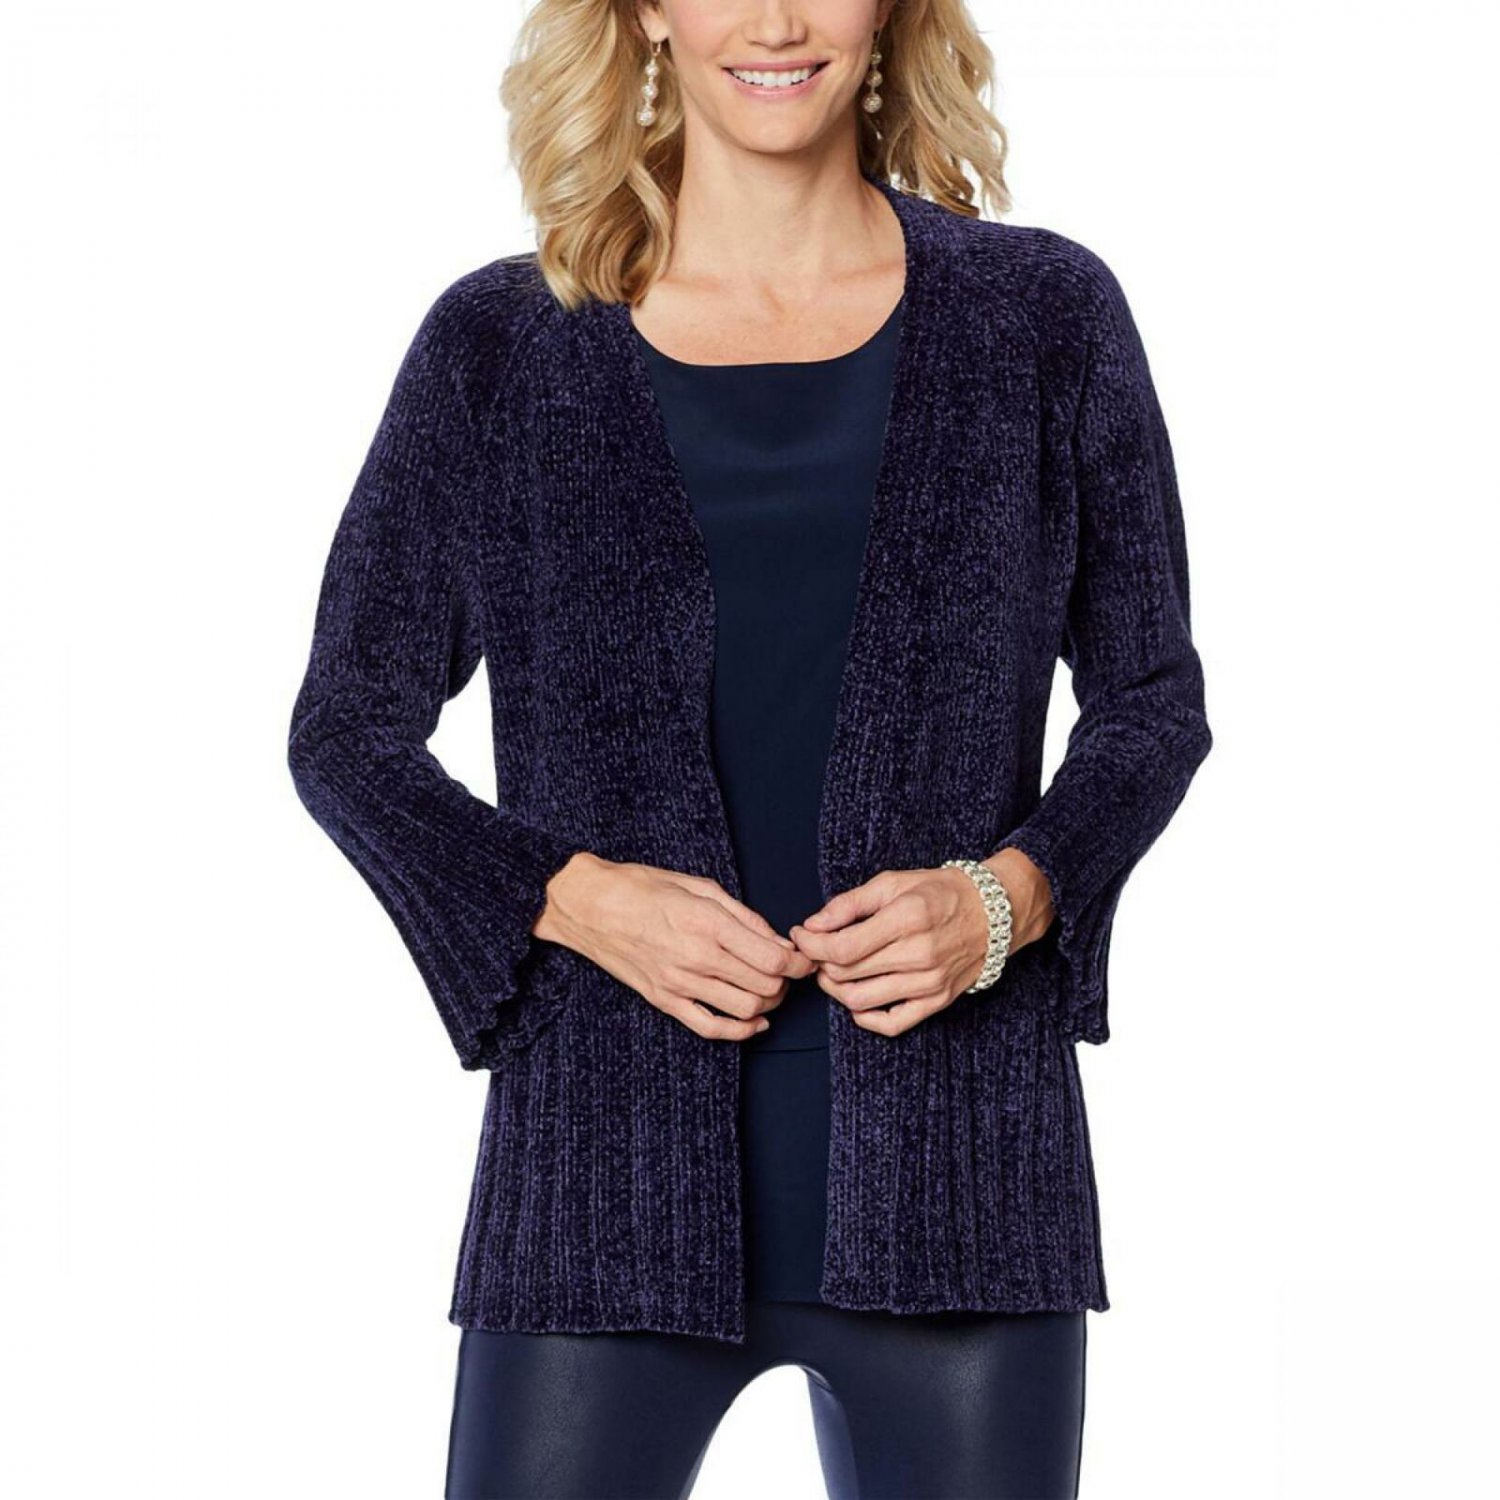 DG2 by Diane Gilman Women's Heathered Chenille Cardigan Sweater X-Small ...